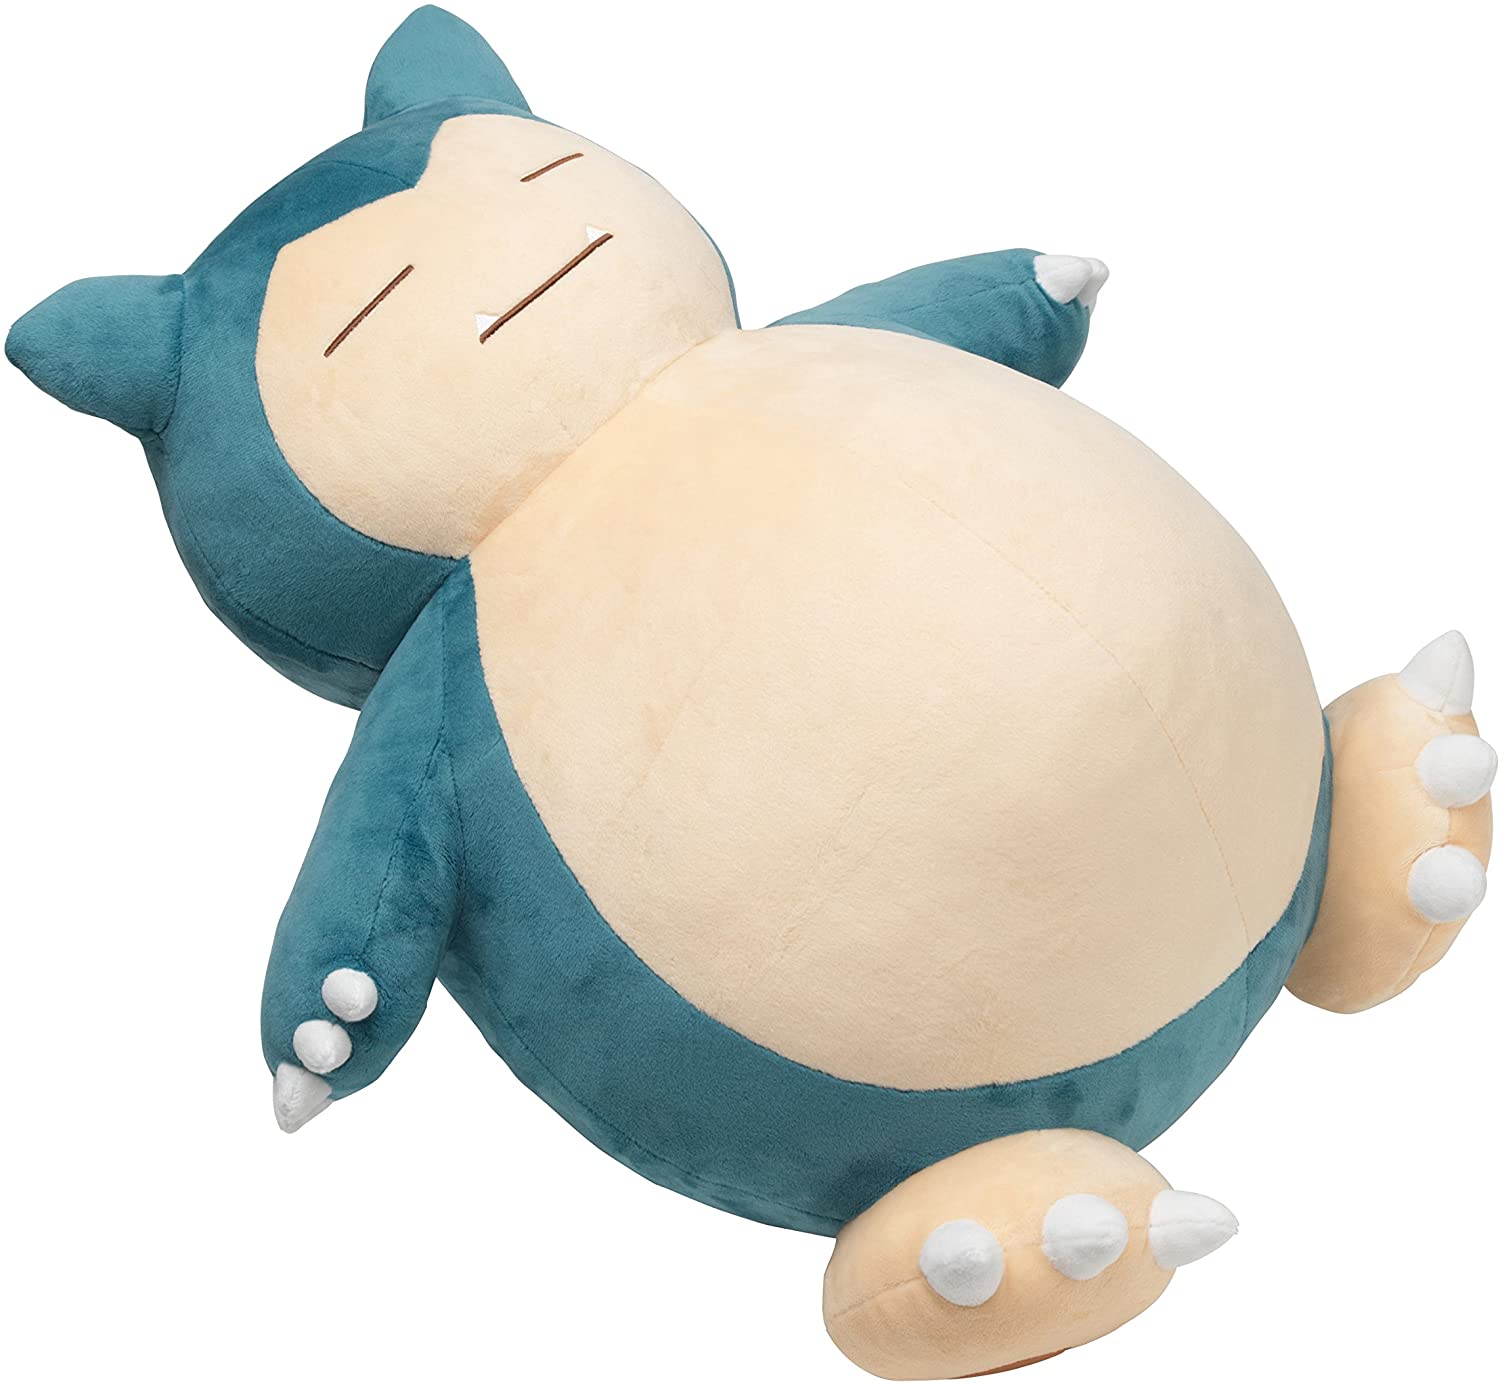 The best Pokemon gifts for kids, Giant Snorlax stuffed plush